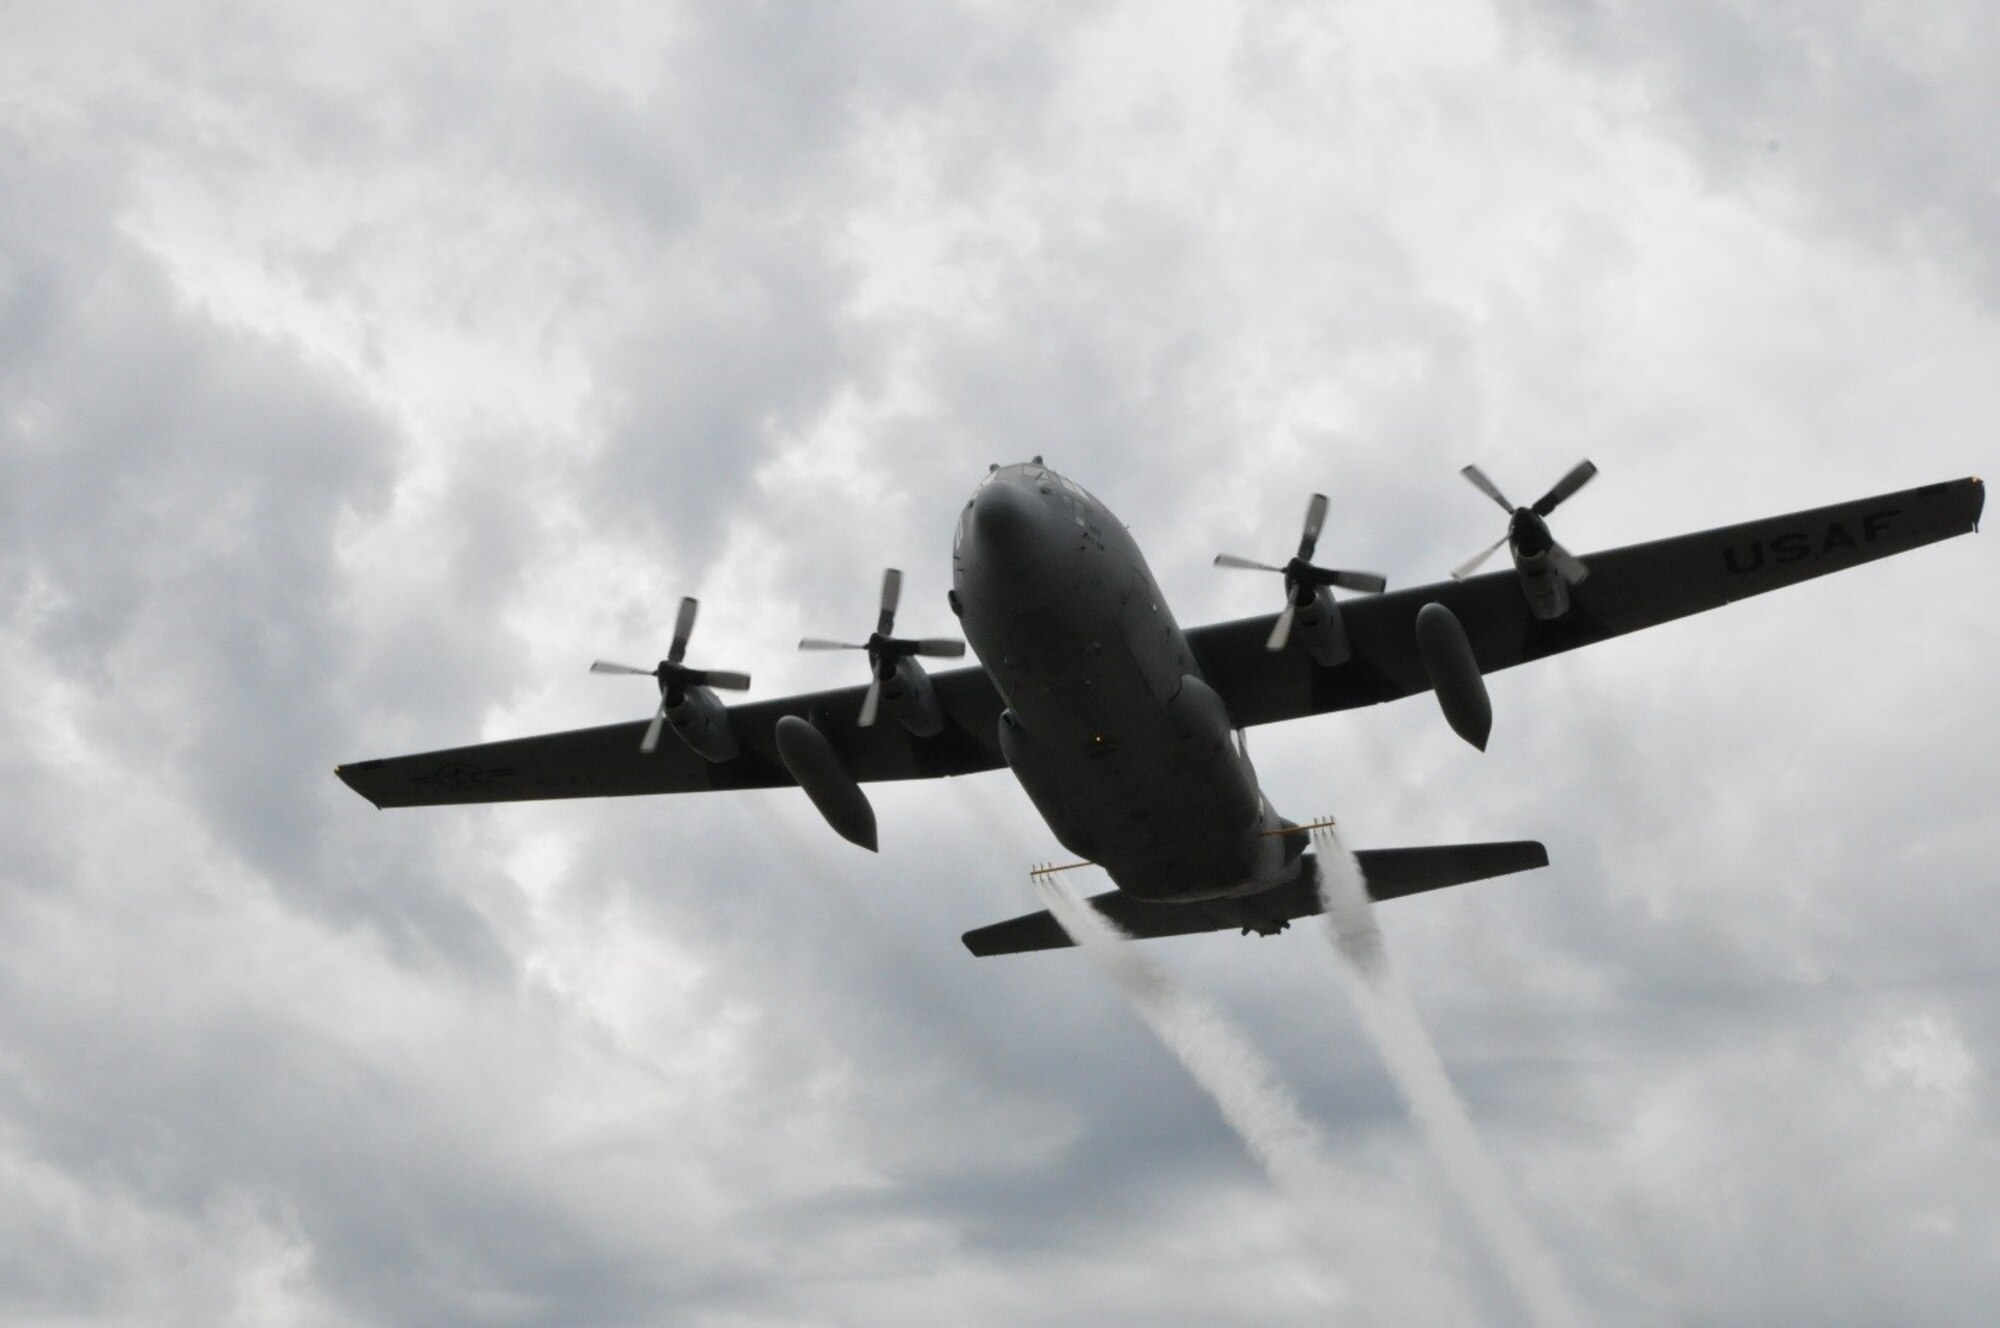 A modified U.S. C-130 aircraft, assigned to the 910th Airlift Wing, sprays water simulating a pesticide solution during a field exercise as part of the Department of Defense Aerial Spray Certification Course, Jan. 13, 2016. The 910th Airlift Wing has been tasked with providing its unique aerial spray capability to assist with recovery efforts in eastern Texas, following the devastation of Hurricane Harvey. Youngstown Air Reserve Station's 910th Airlift Wing is home to DoD’s only aerial spray mission.